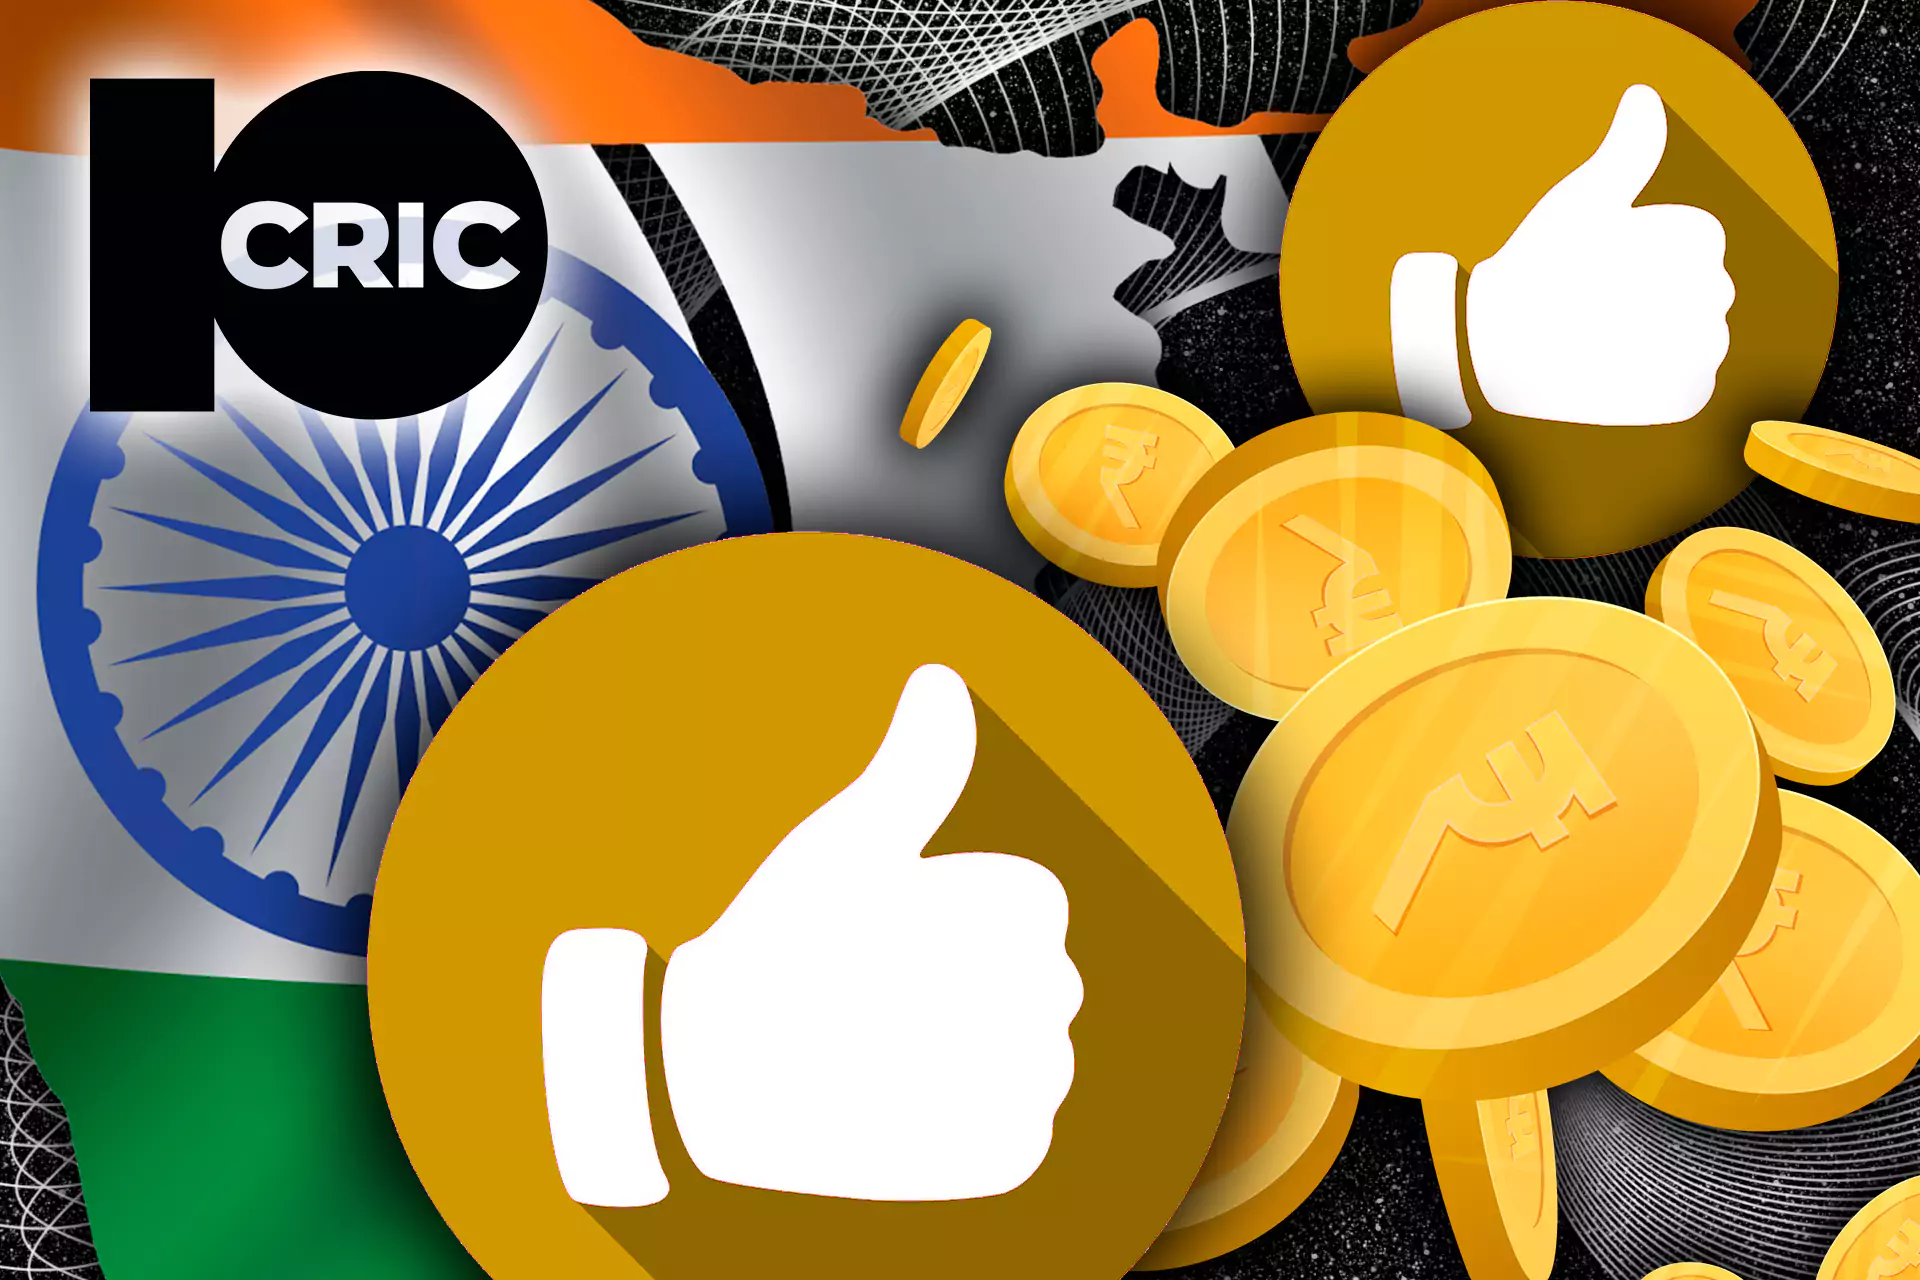 The 10Cric Casino site focuses on players from India.